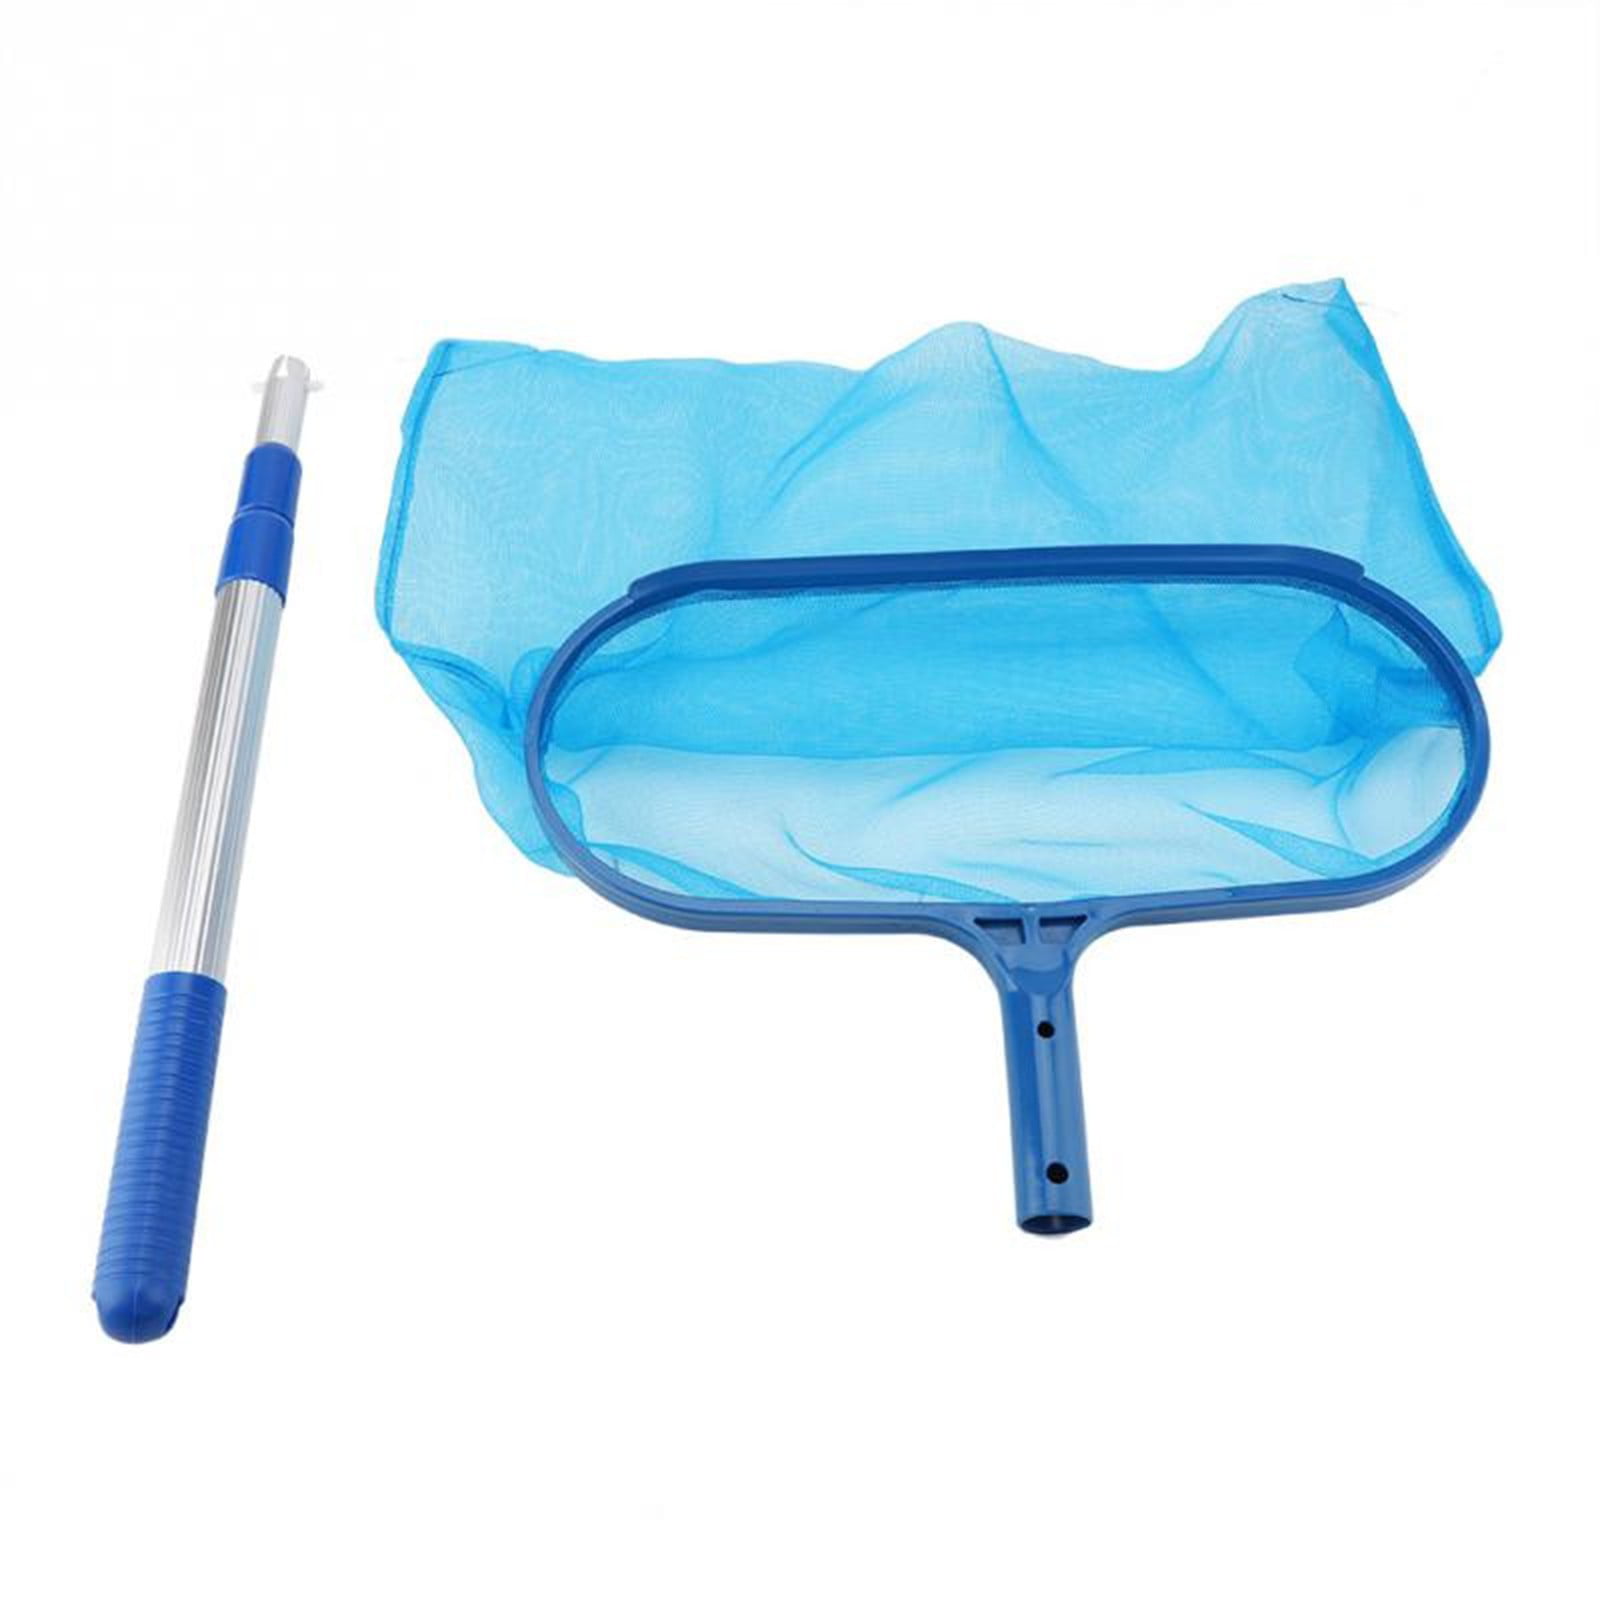 Swimming Pool Cleaner Supplies Skimmer Leaf screen with 17-41 inch telescopic pole Fine Mesh Blue Clean Spas Ponds & Pool Pool Skimmer Swimming Net with Pole Professional Pool Net Skimmer 